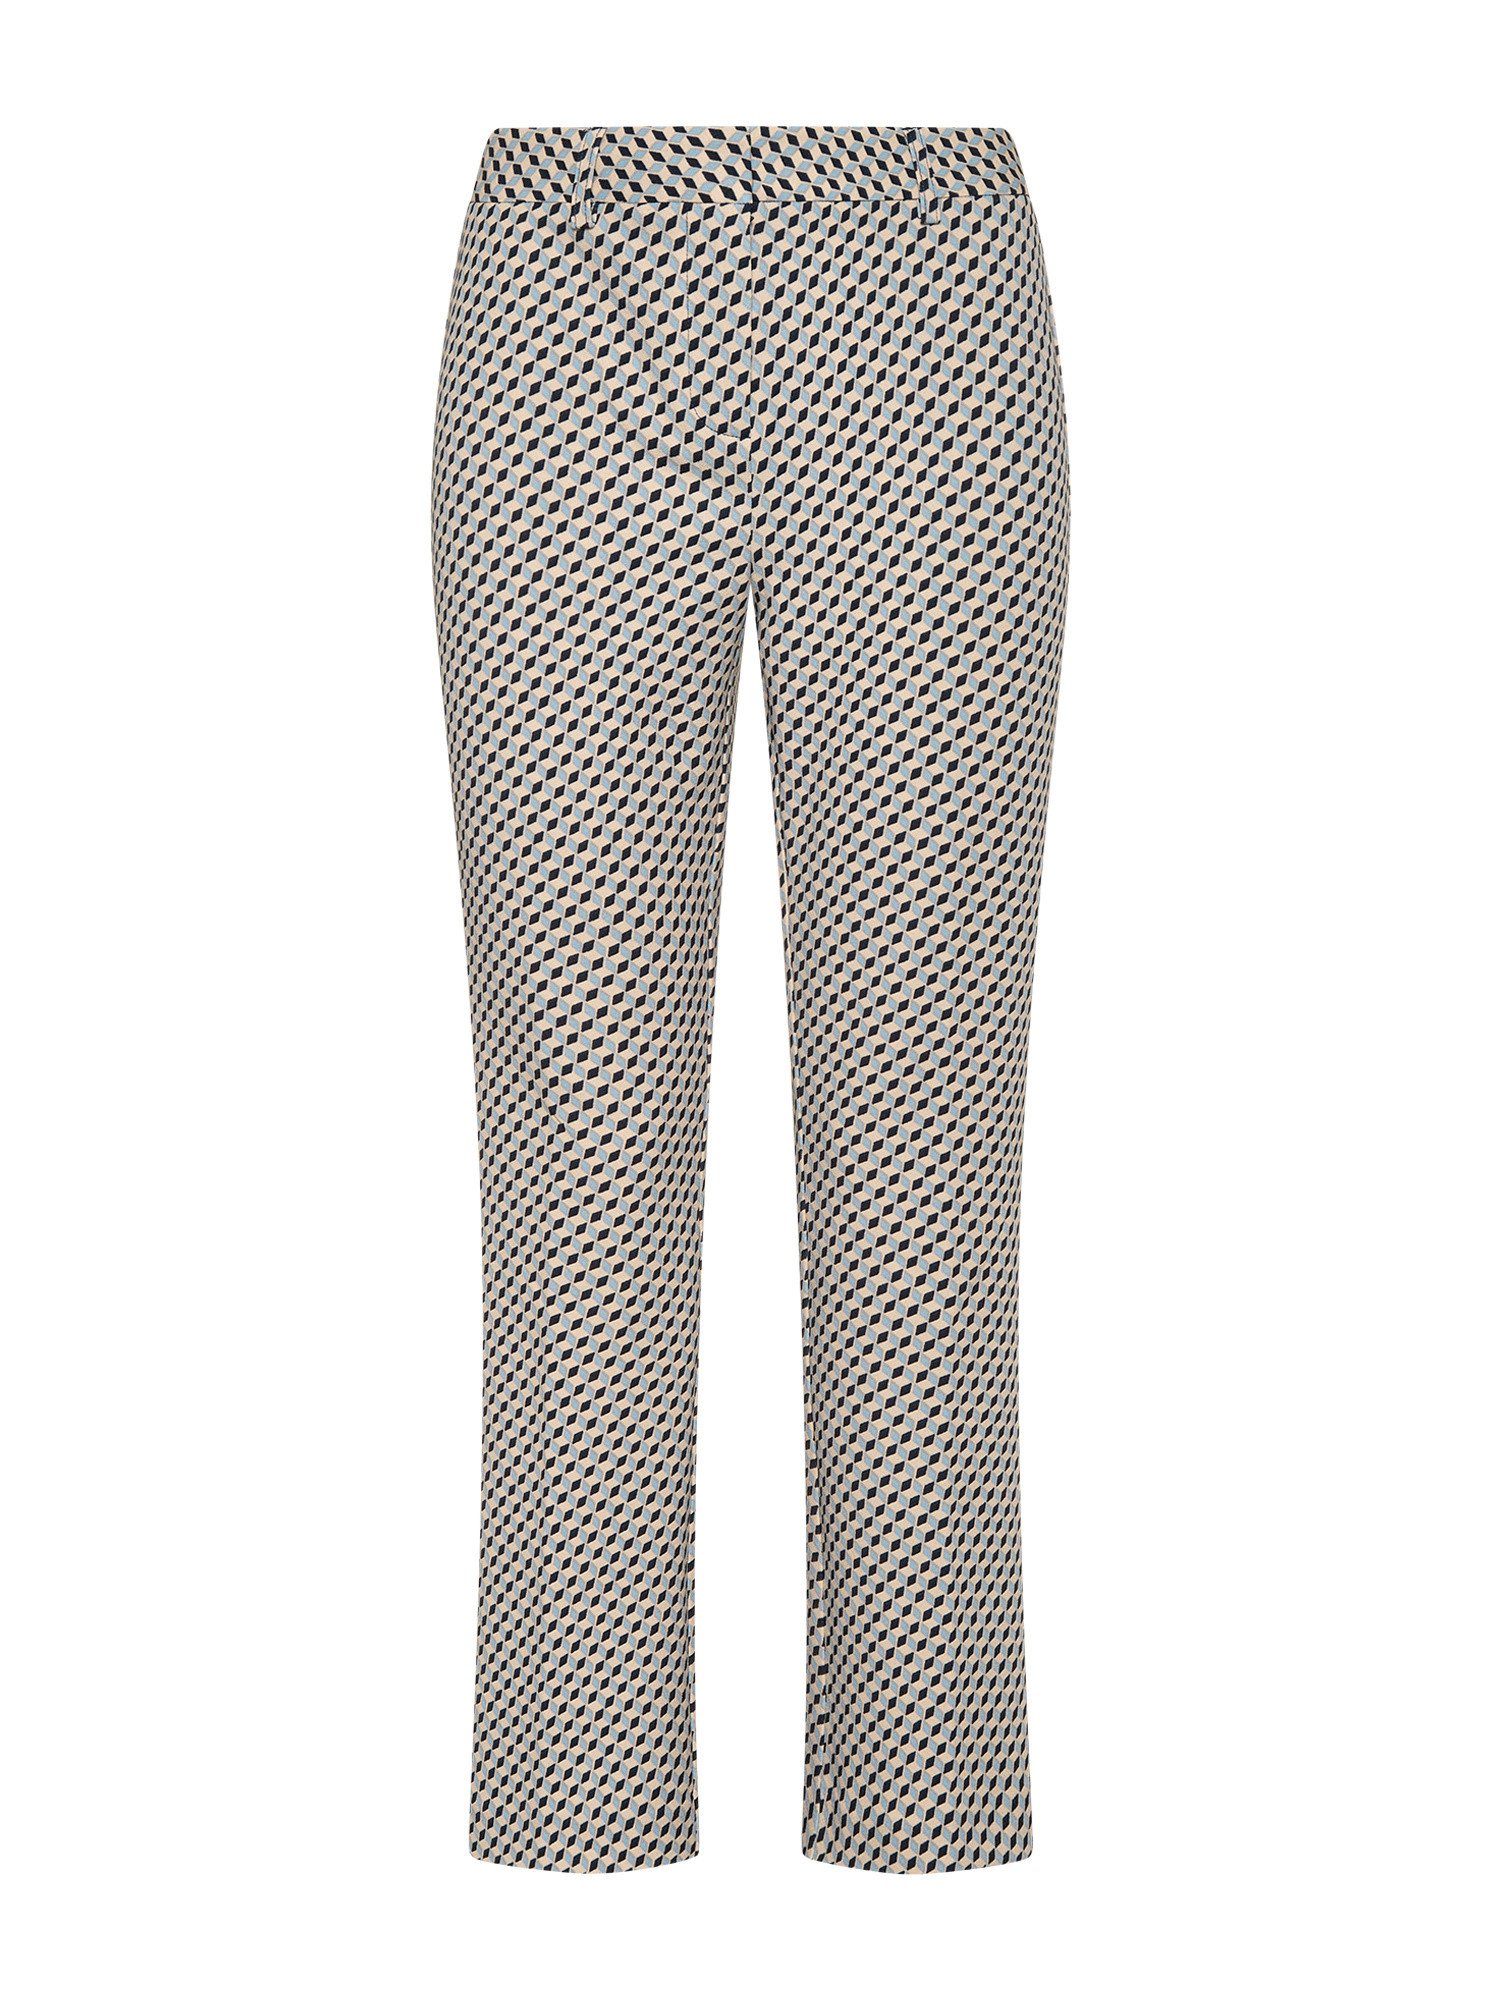 Koan - Flare trousers in printed fabric, Light Blue, large image number 0